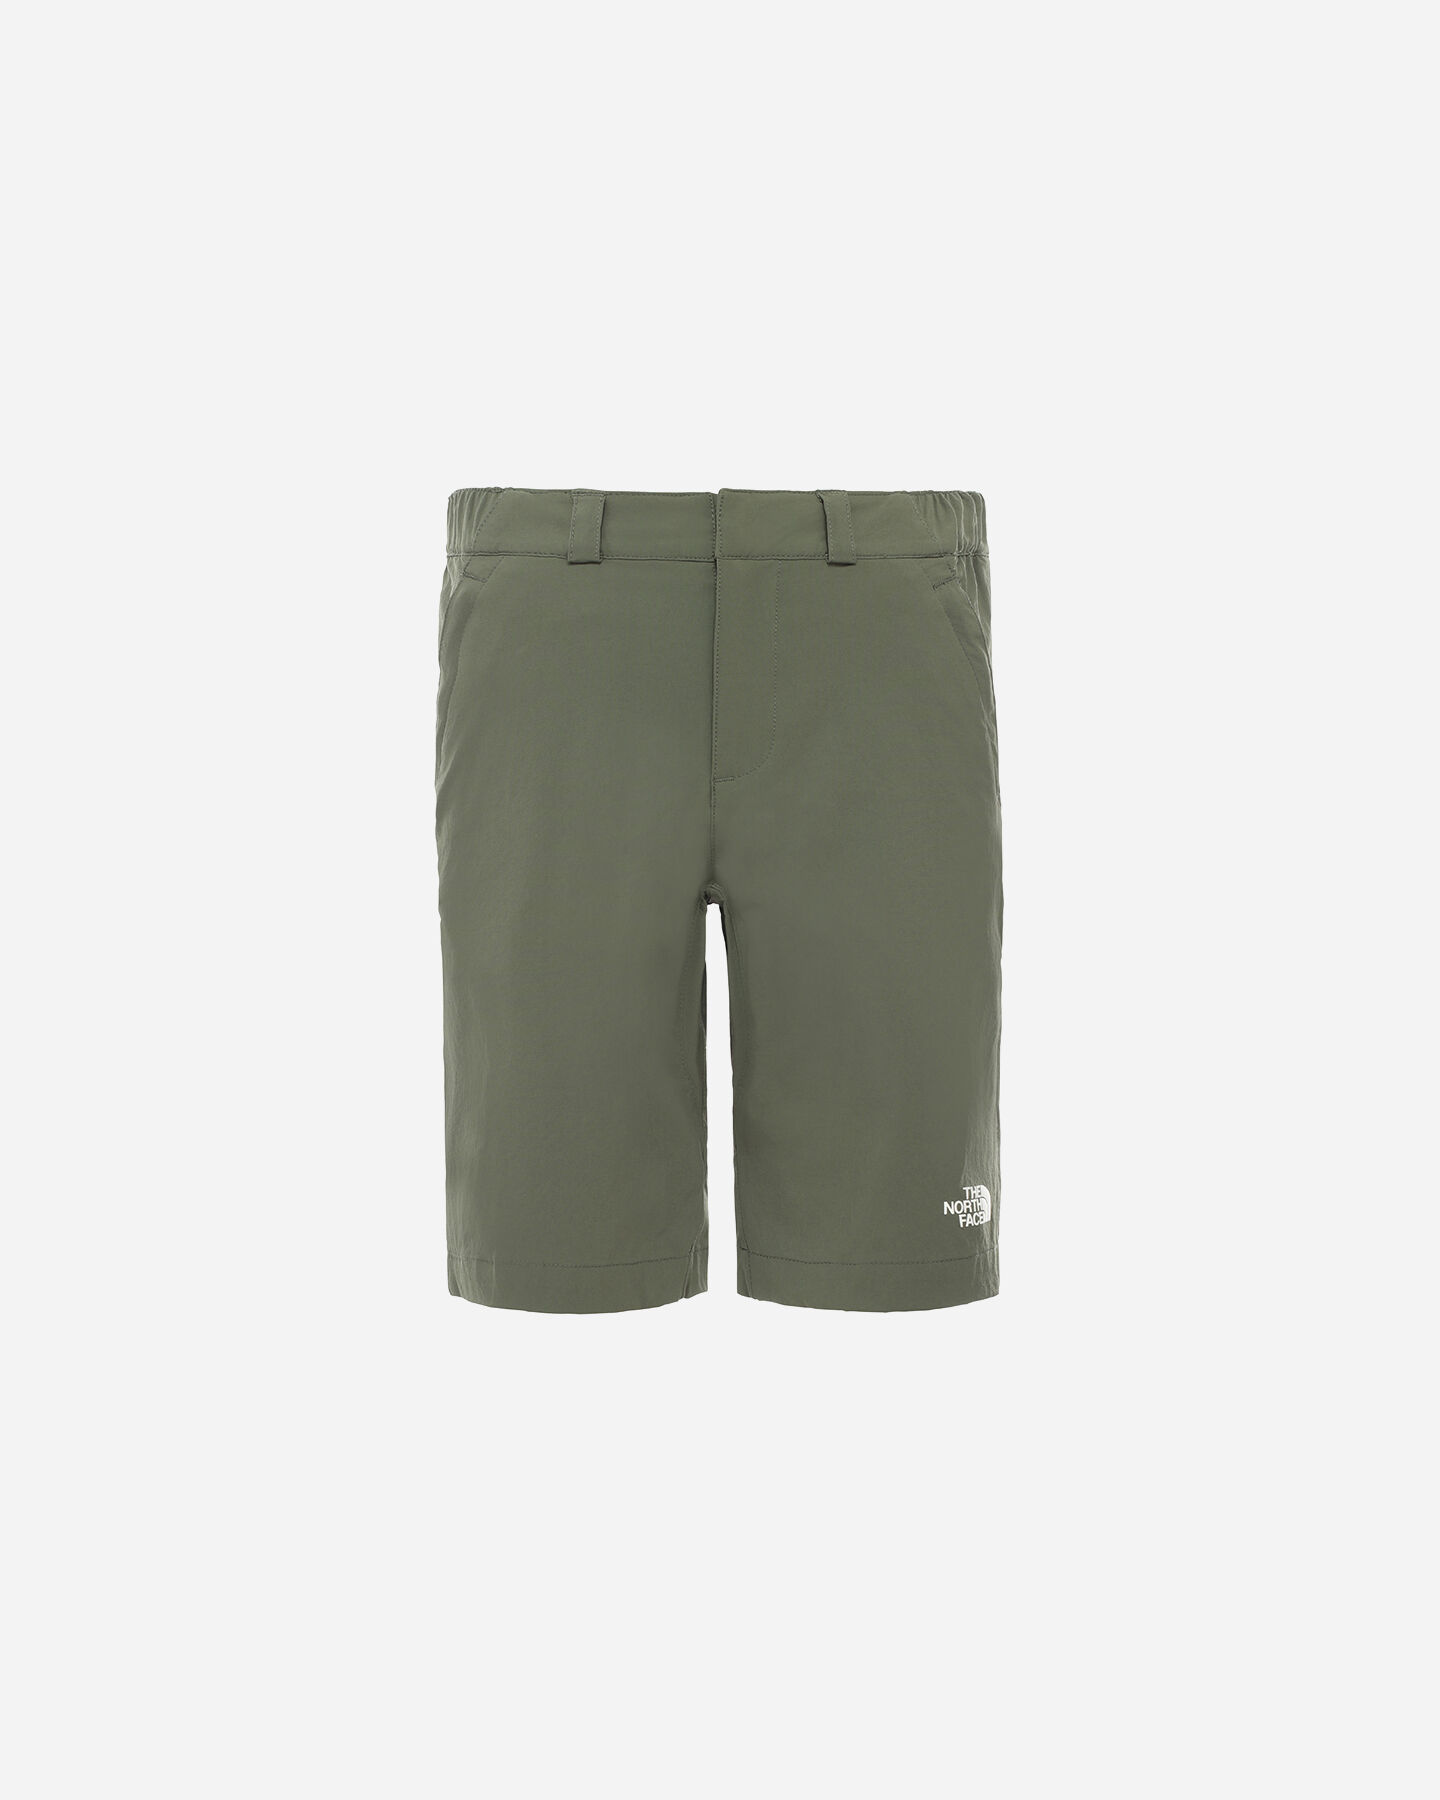  Pantaloncini THE NORTH FACE EXPLORATION JR S5192903|NYC|REGXS scatto 0